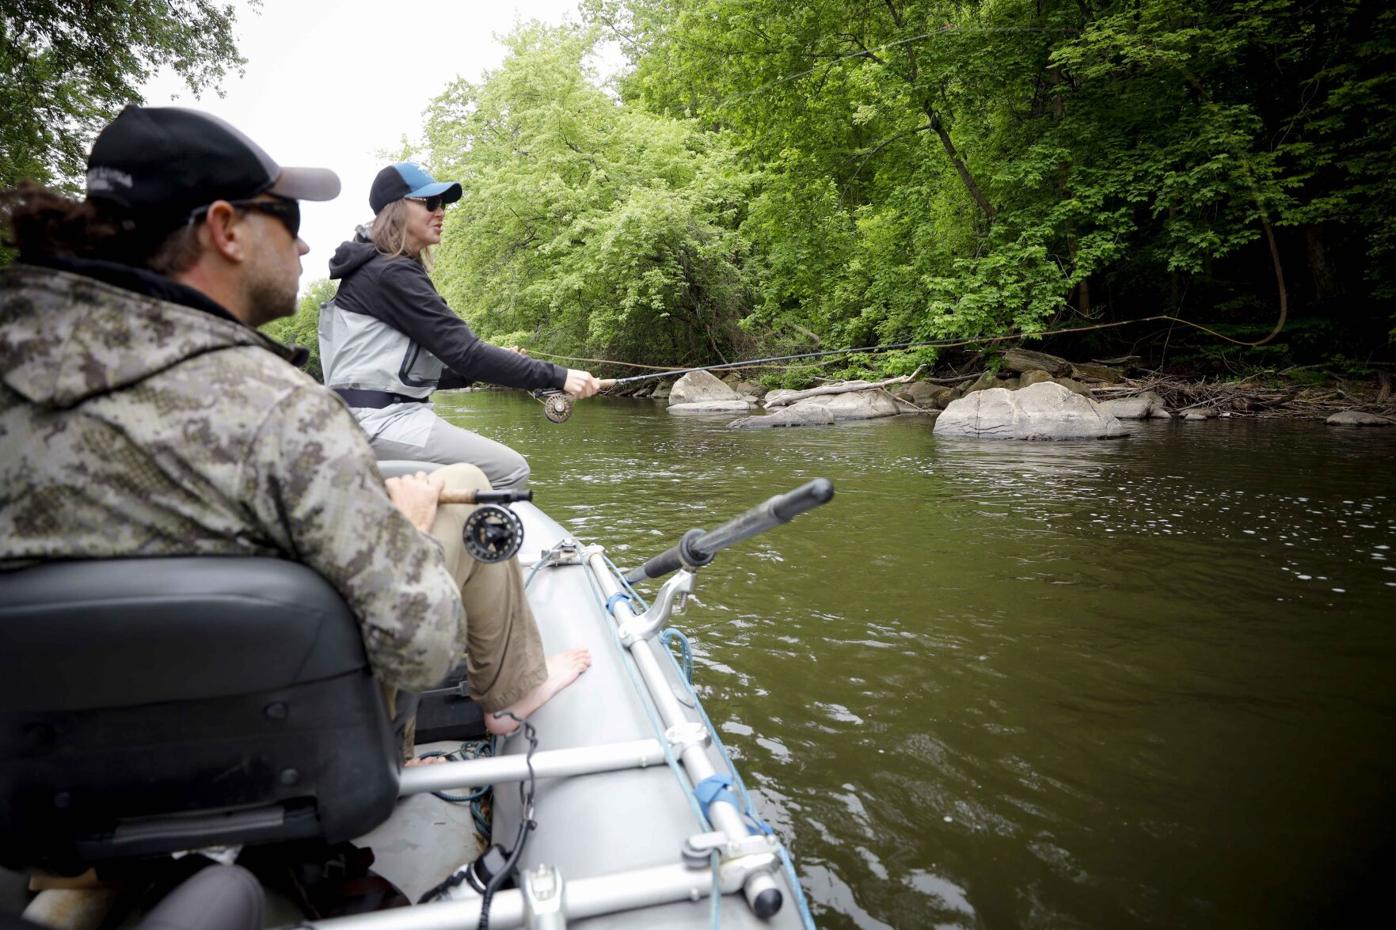 Gene Chague: Several events coming up for anglers, from novice to expert, Sports